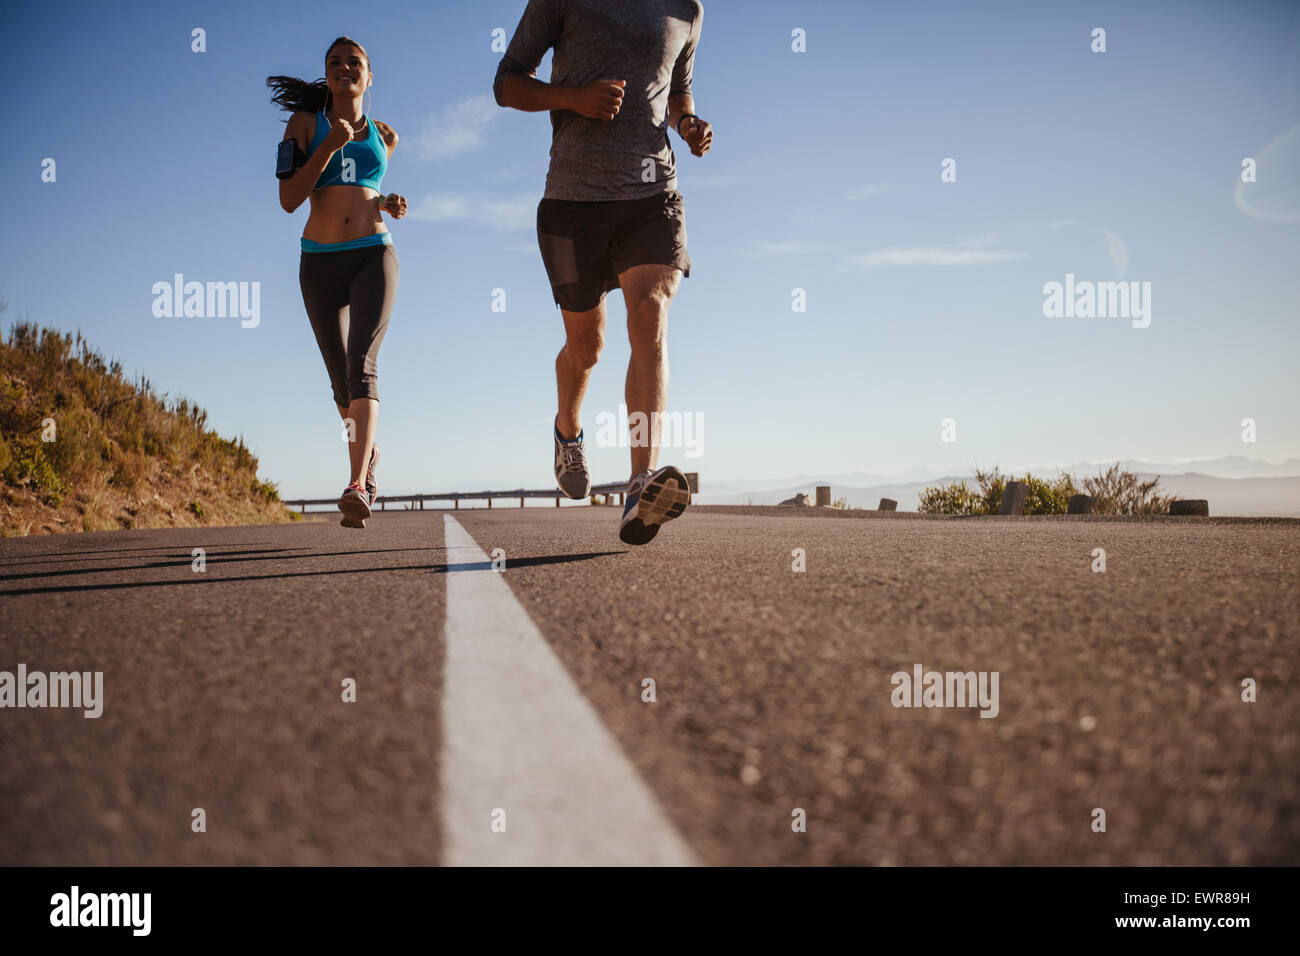 Low angle shot of young woman running on road with man in front on a summer morning. Runners training on country road. Stock Photo